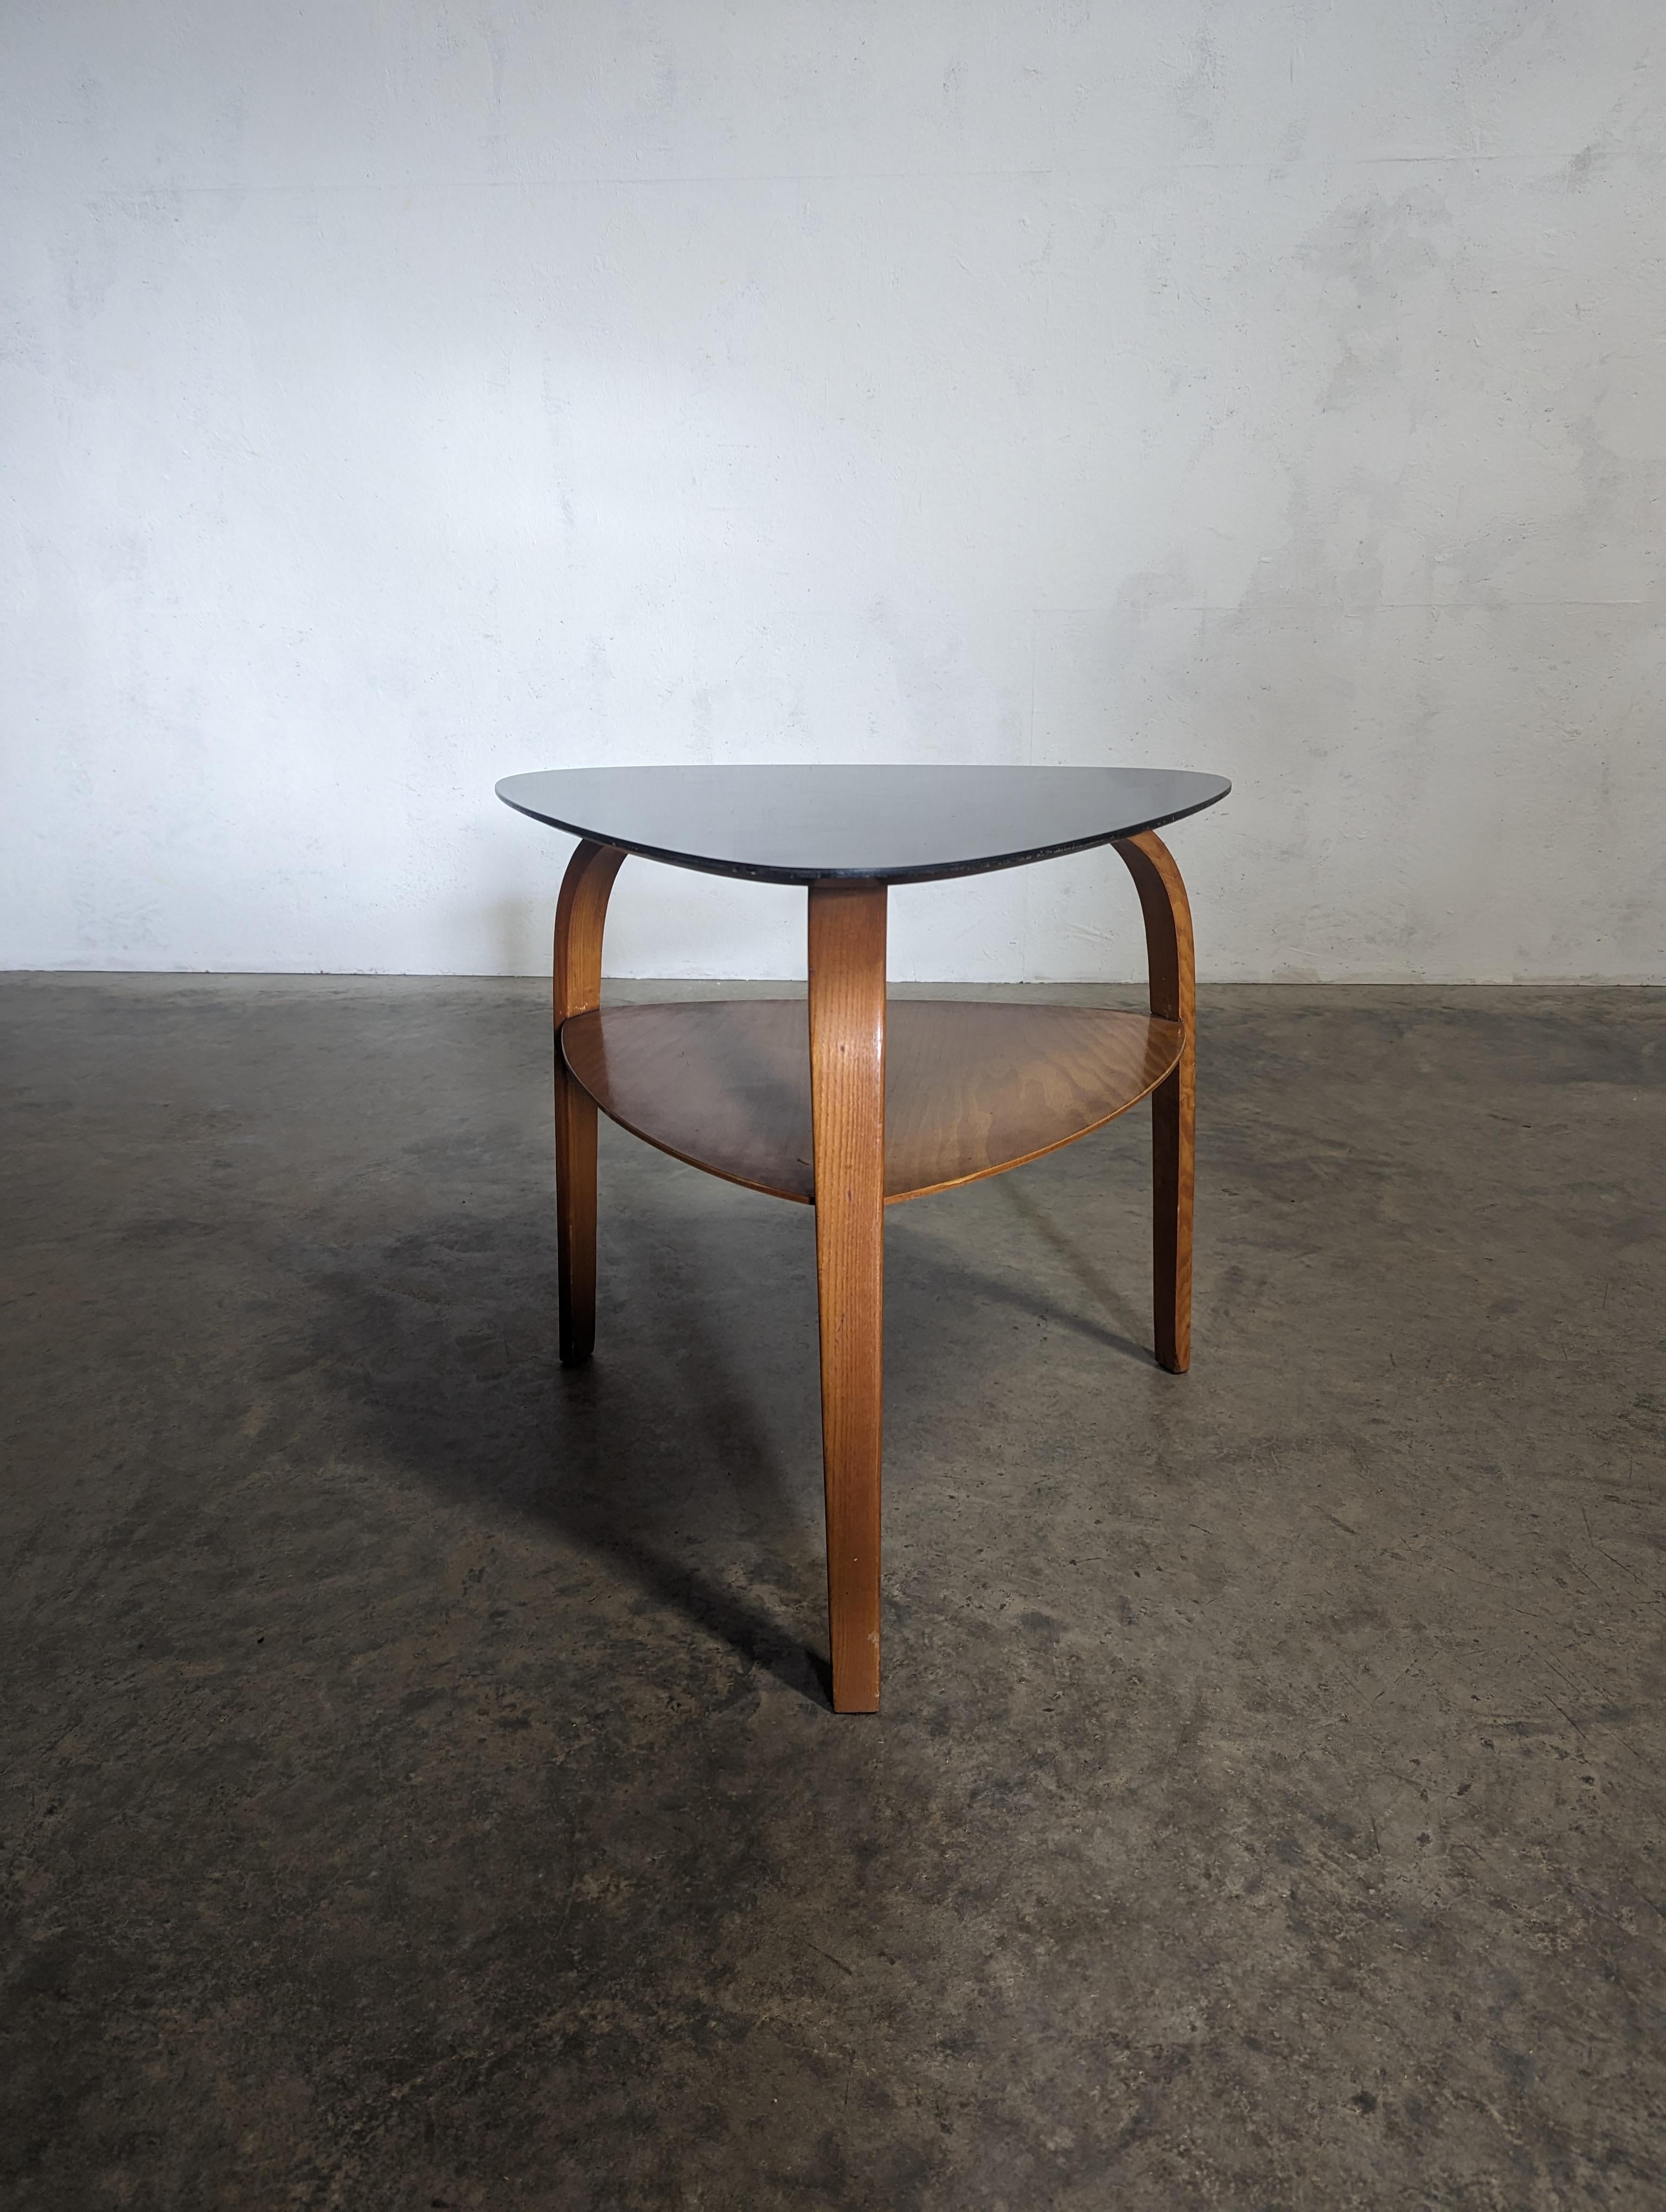 Coffee table, from the Bow Wood line circa 1950 by french company Steiner.
Top is  in black 